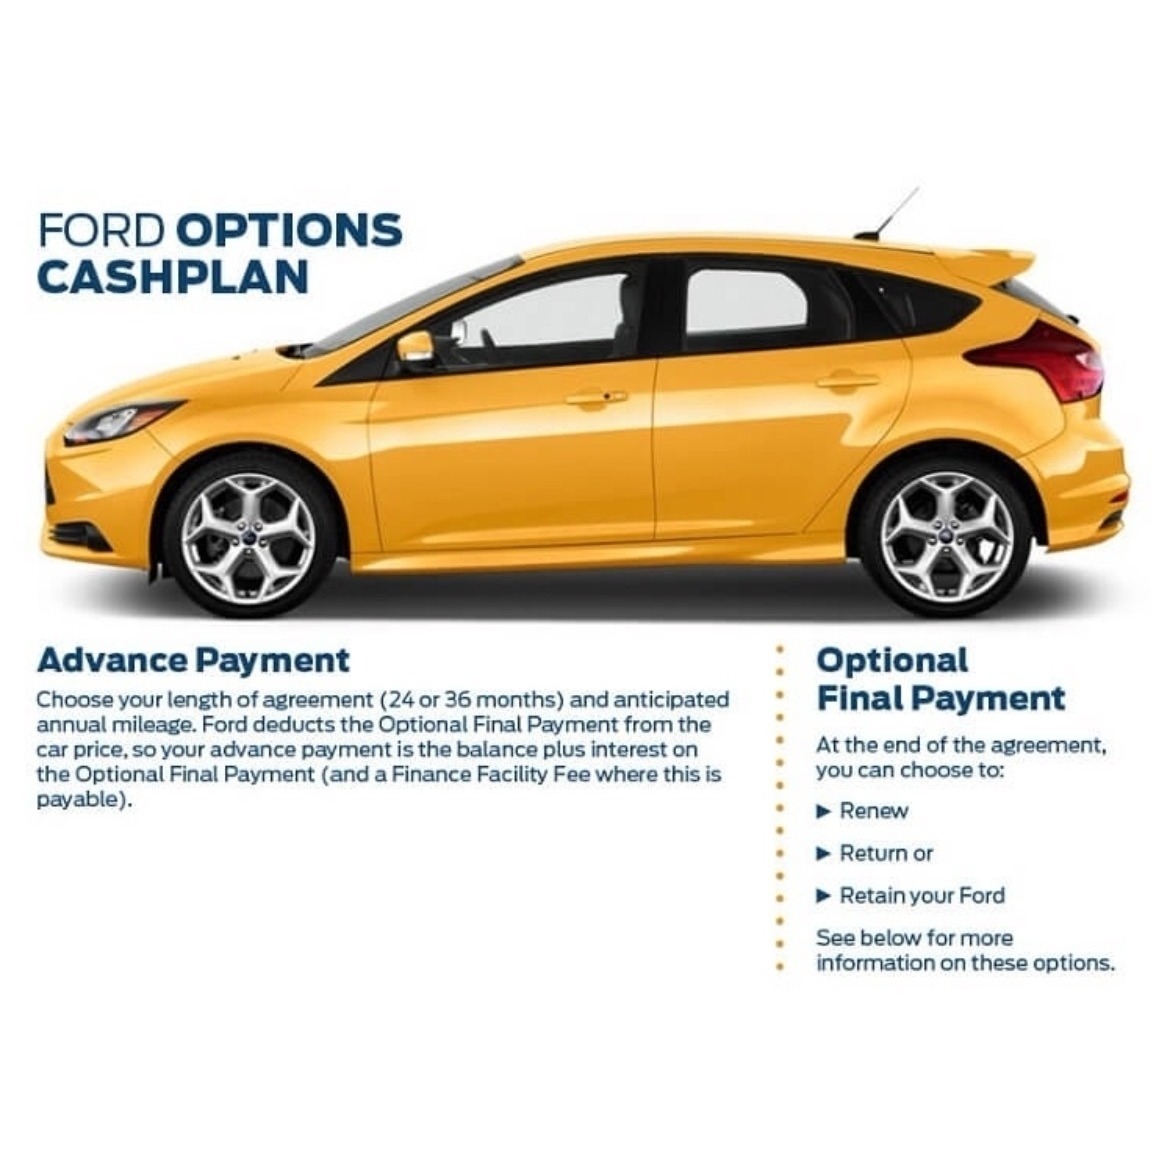 Ford Options Cash Plan